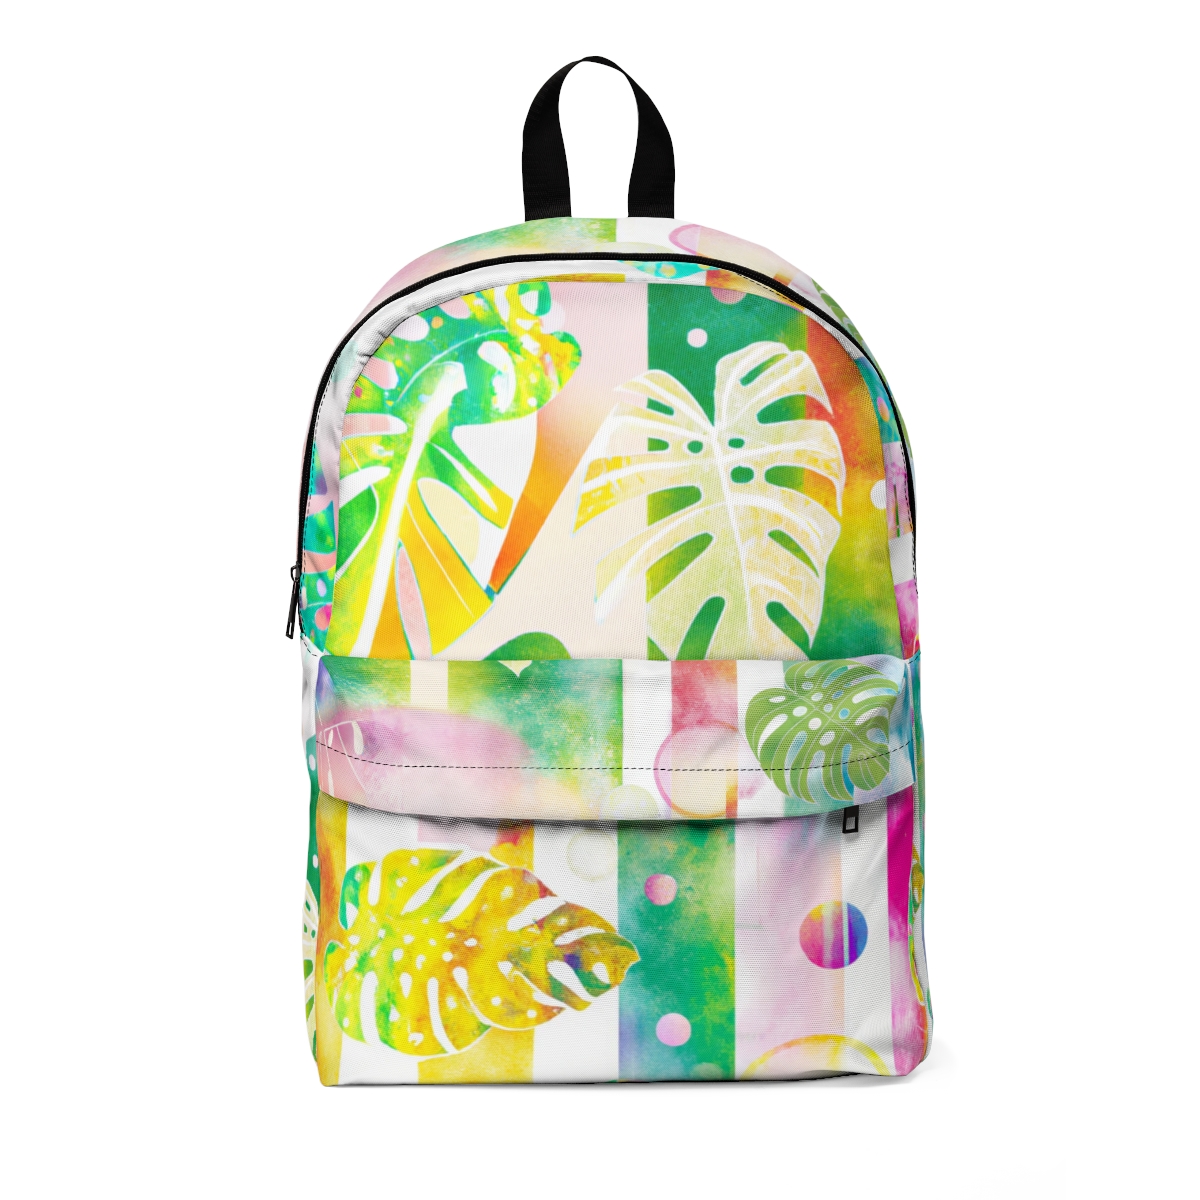 A Pastel Monstera Backpack by Green Thumb Nursery, available at a plant nursery near me.